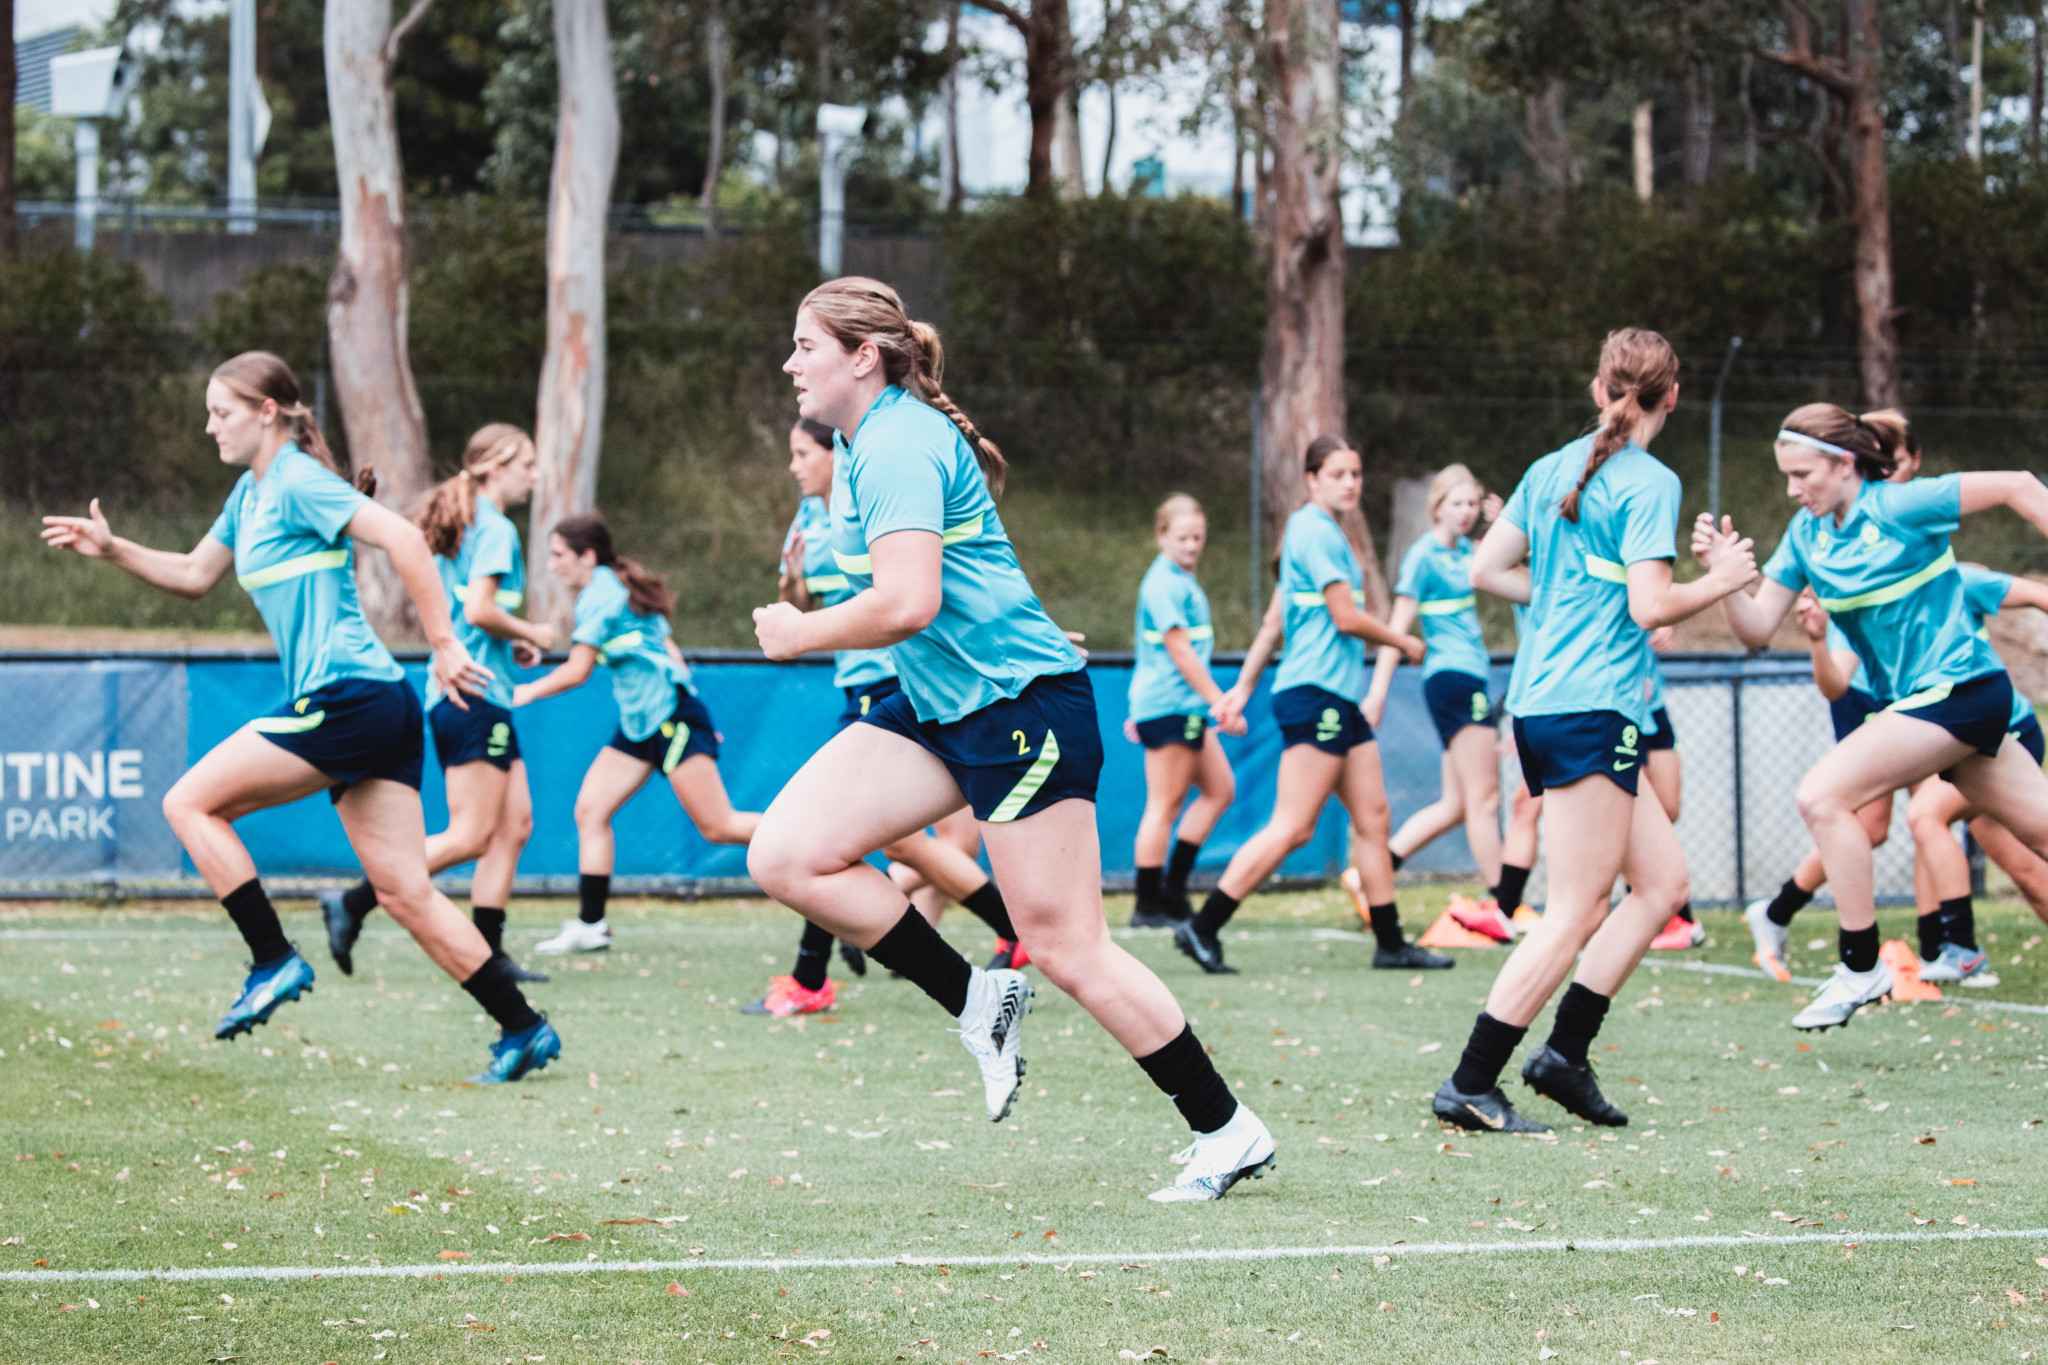 Australia are set to compete at the FIFA Under-20 Women's World Cup after North Korea's withdrawal ©Football Australia